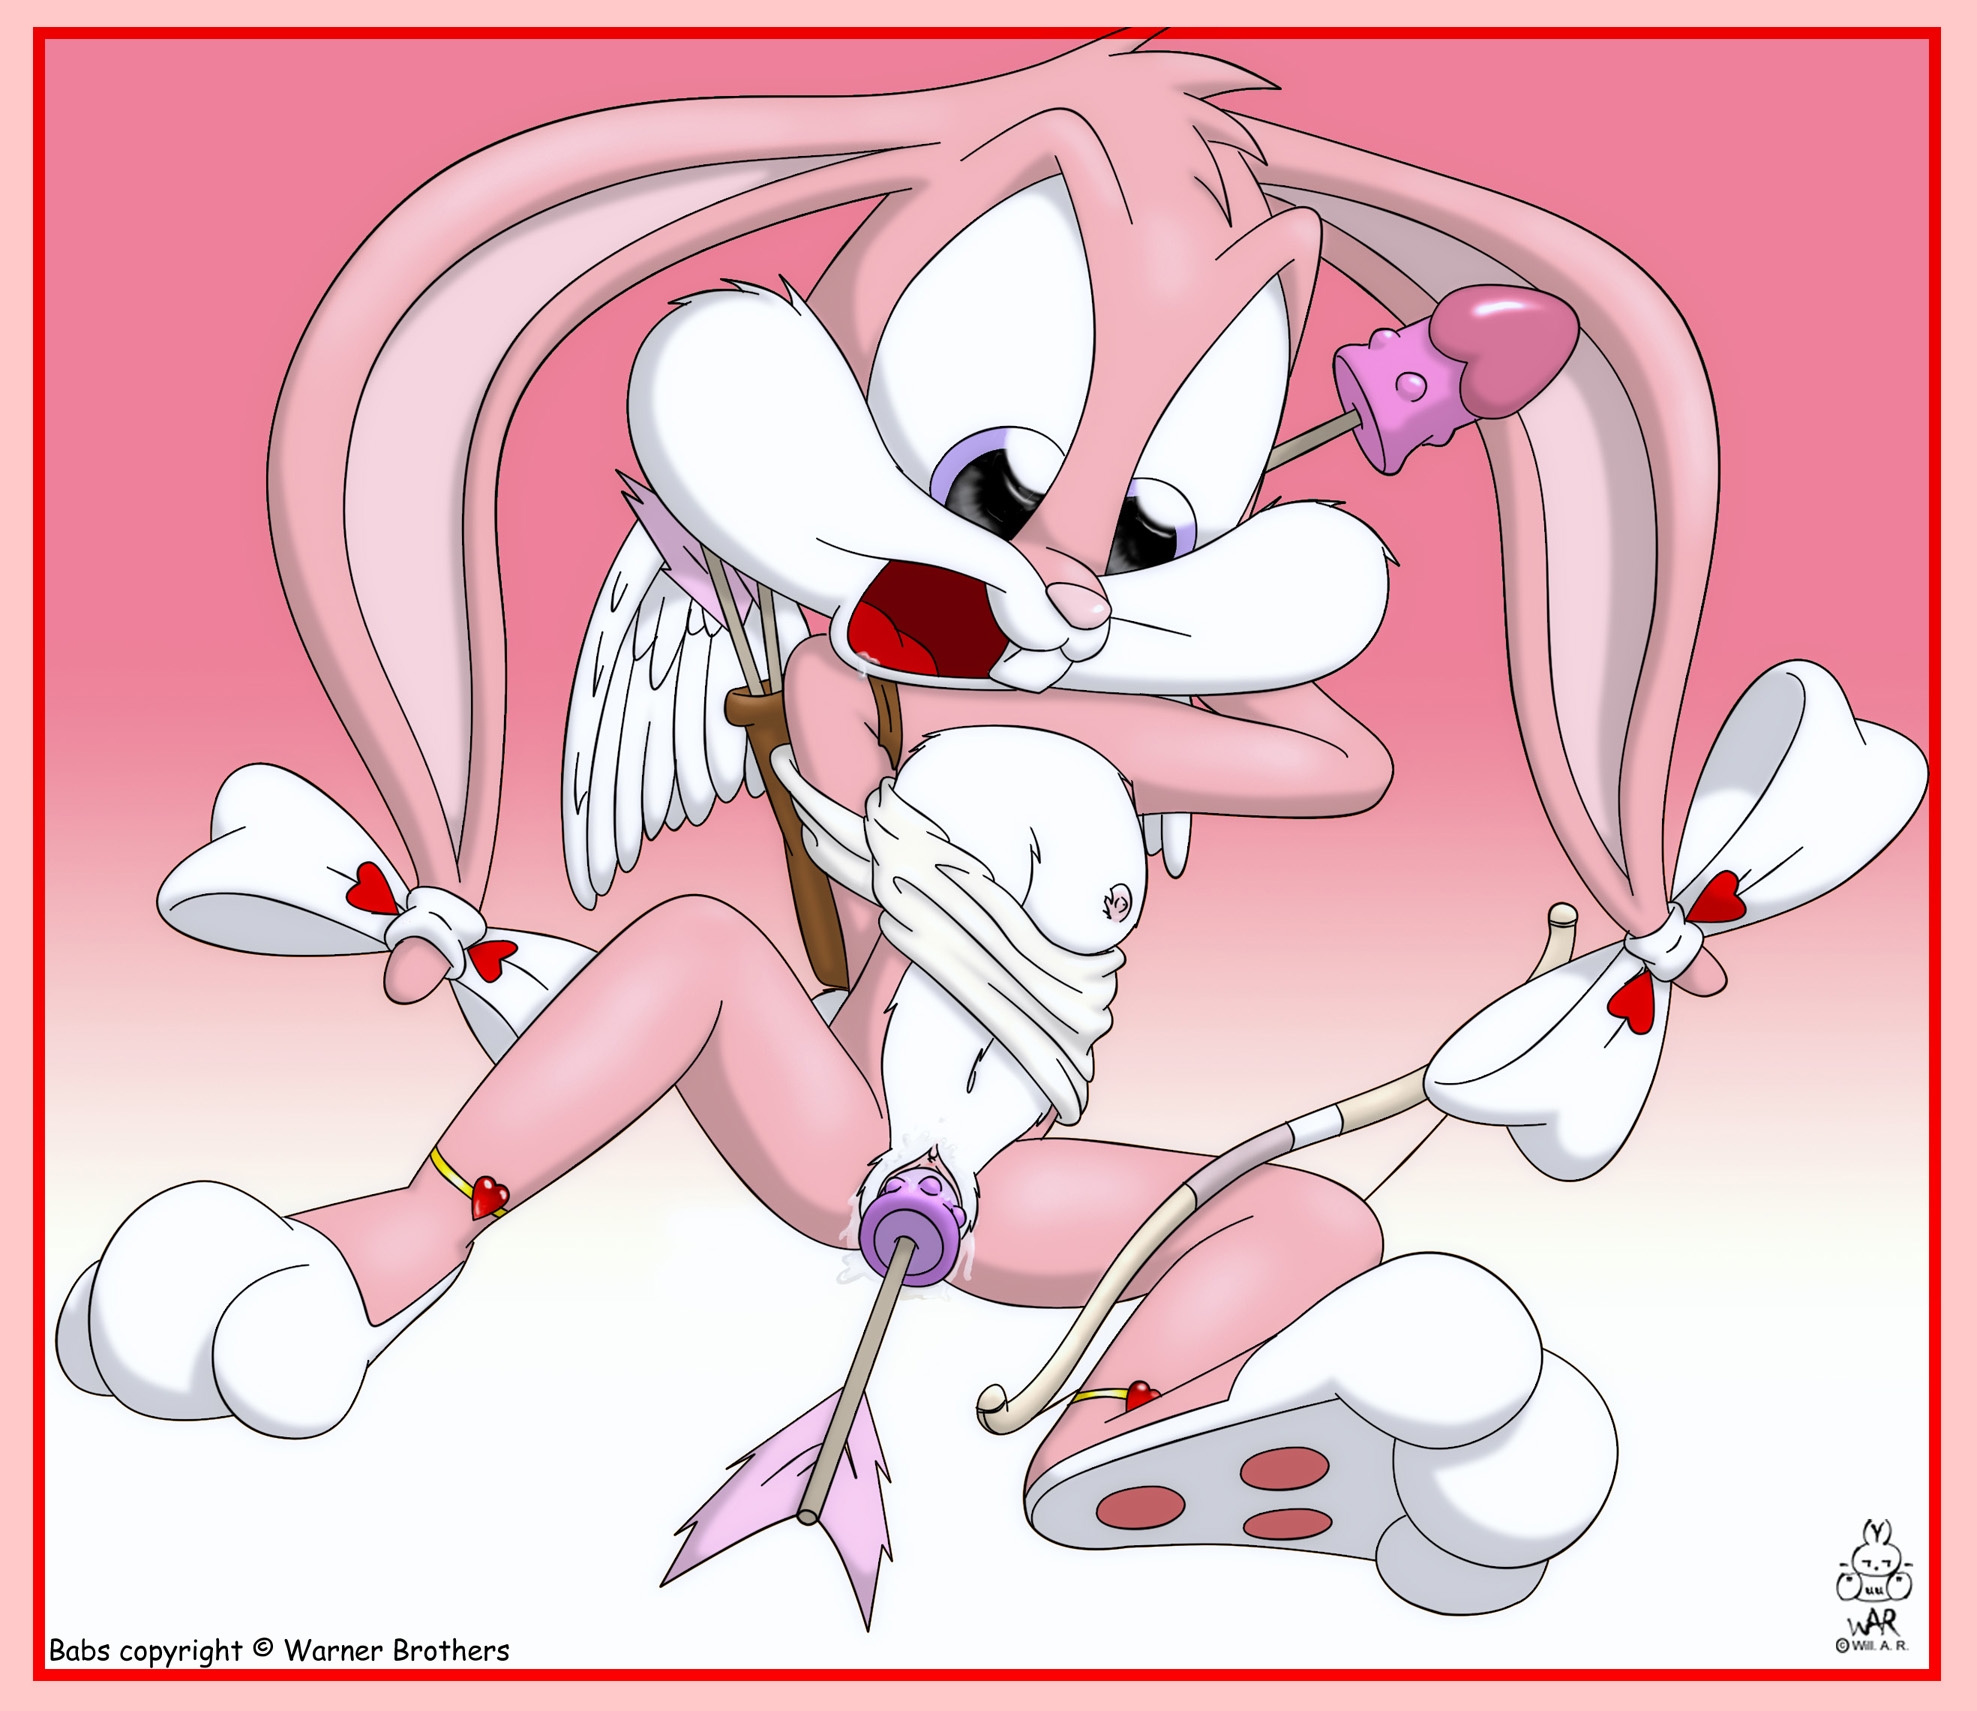 Tiny Toons Babs Bunny Crying nude pic, sex photos Tiny Toons Babs Bunny Cry...